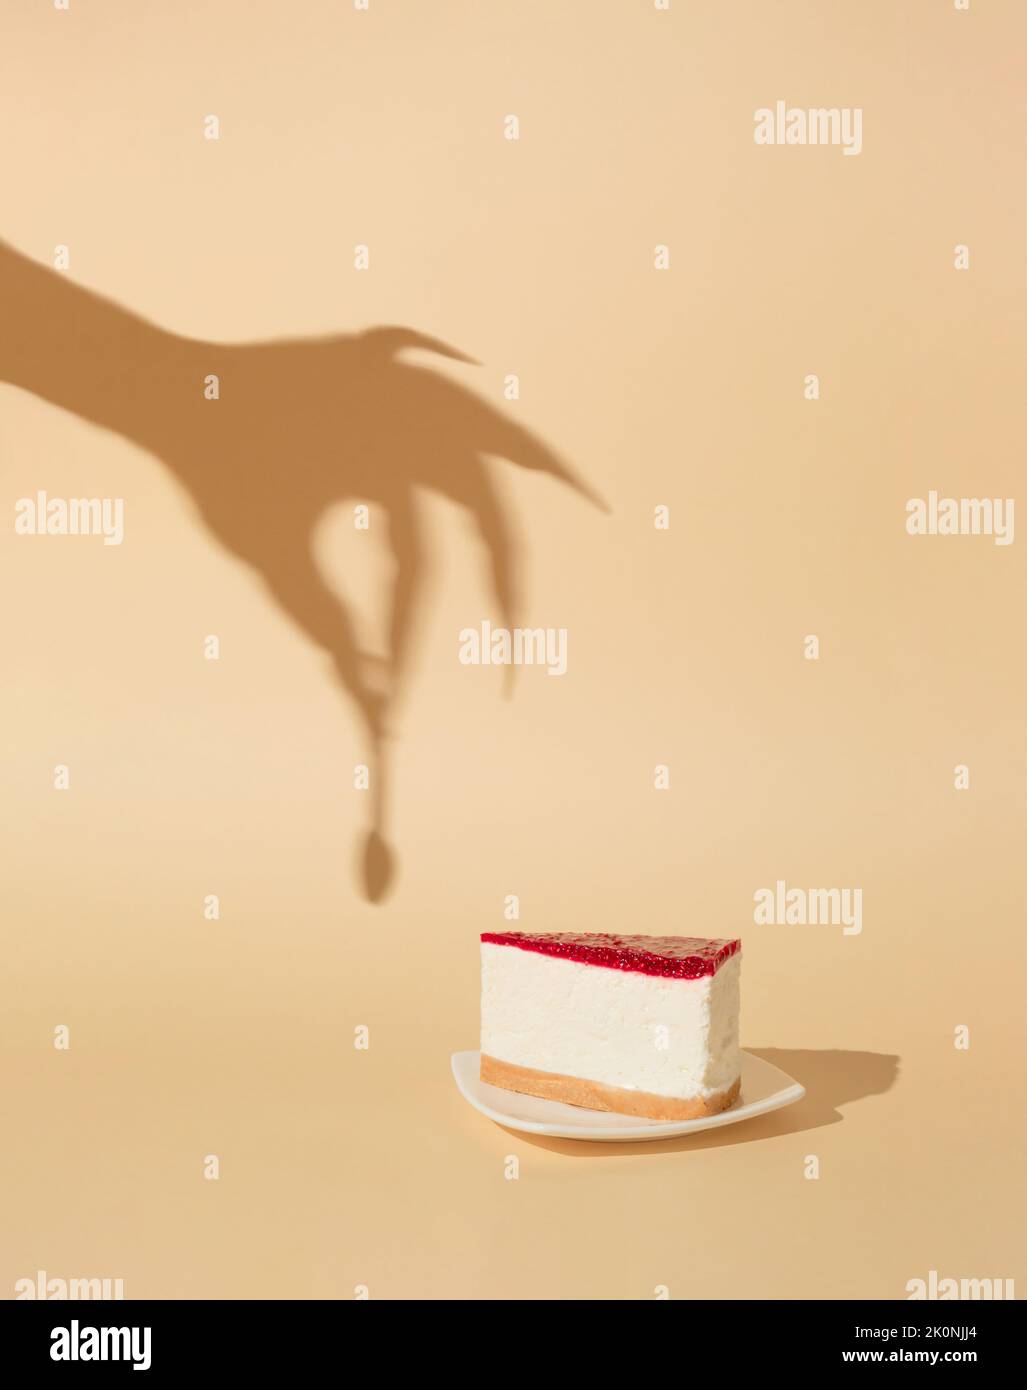 Halloween minimal concept with cheesecake and witch or zombie hand shadow. Creative spooky holiday fun background. Stock Photo